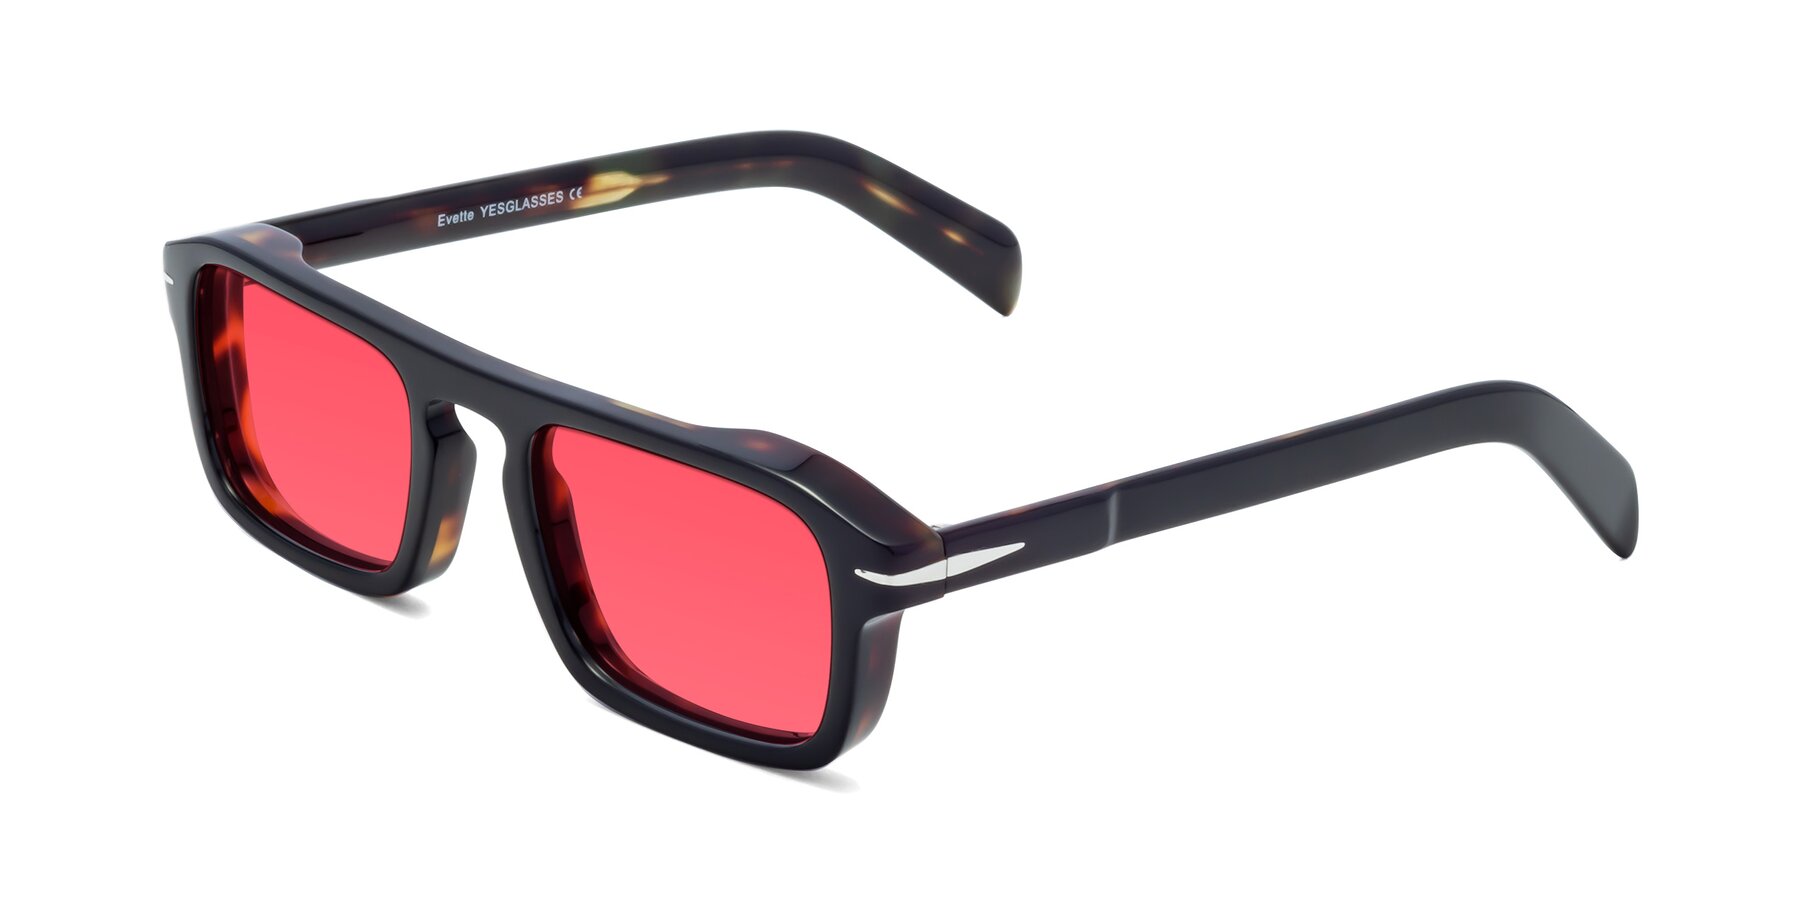 Angle of Evette in Black-Tortoise with Red Tinted Lenses